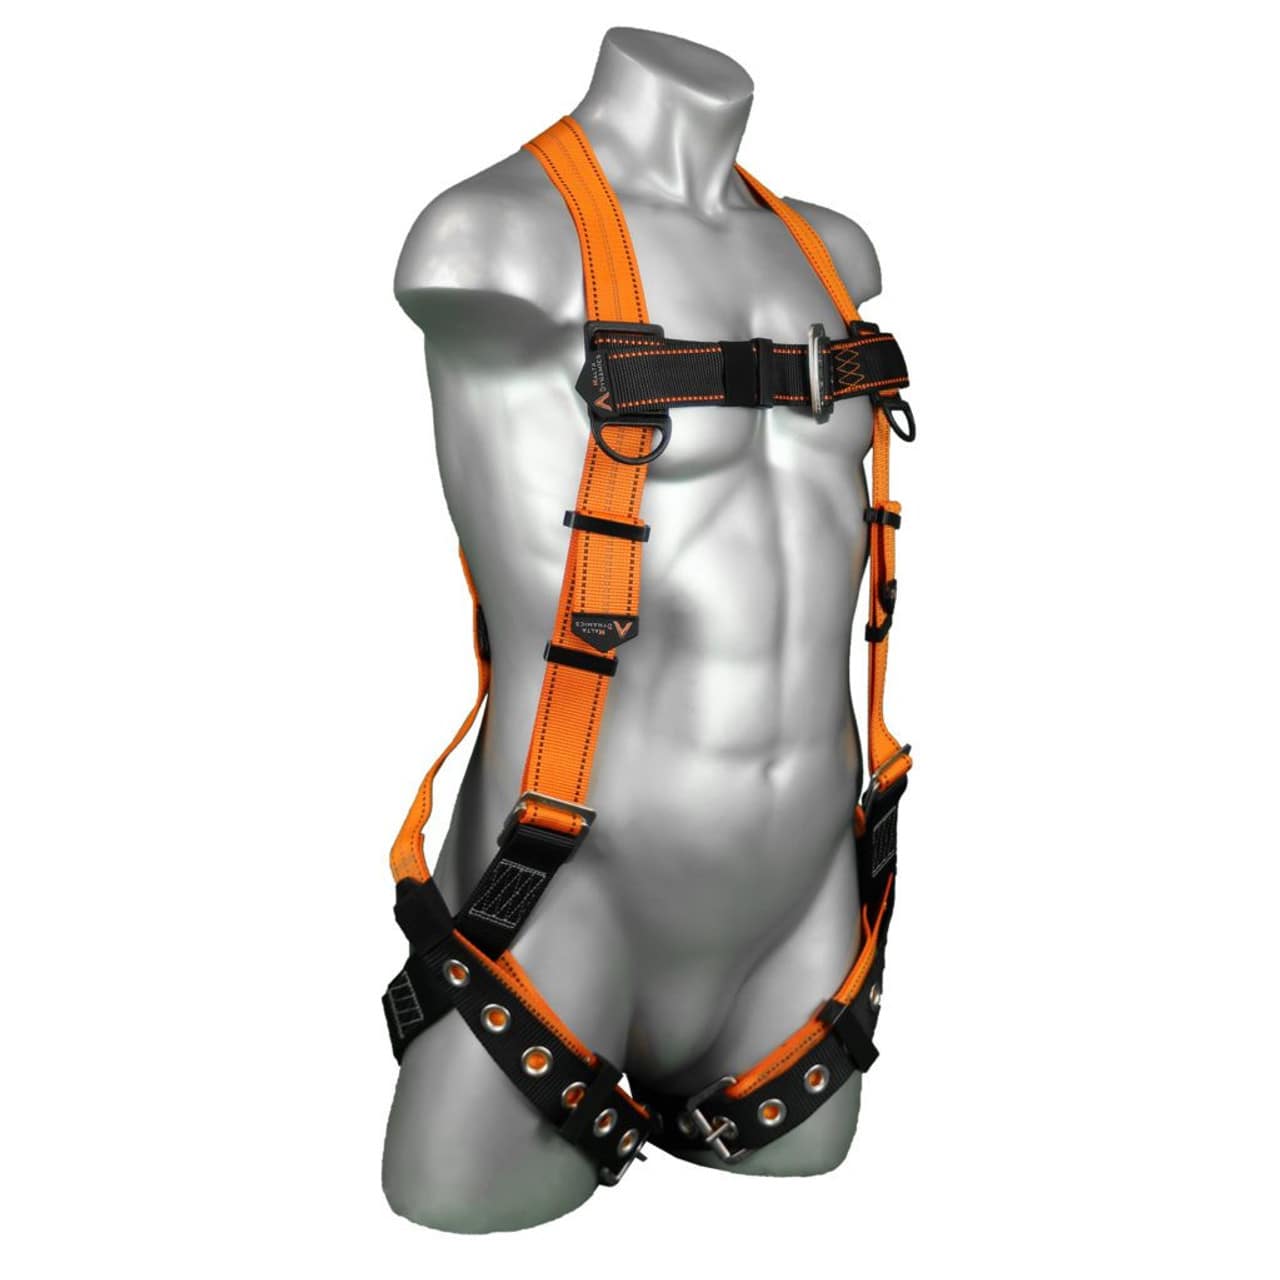 Malta Dynamics Warthog B2002 full body safety harness for fall protection.